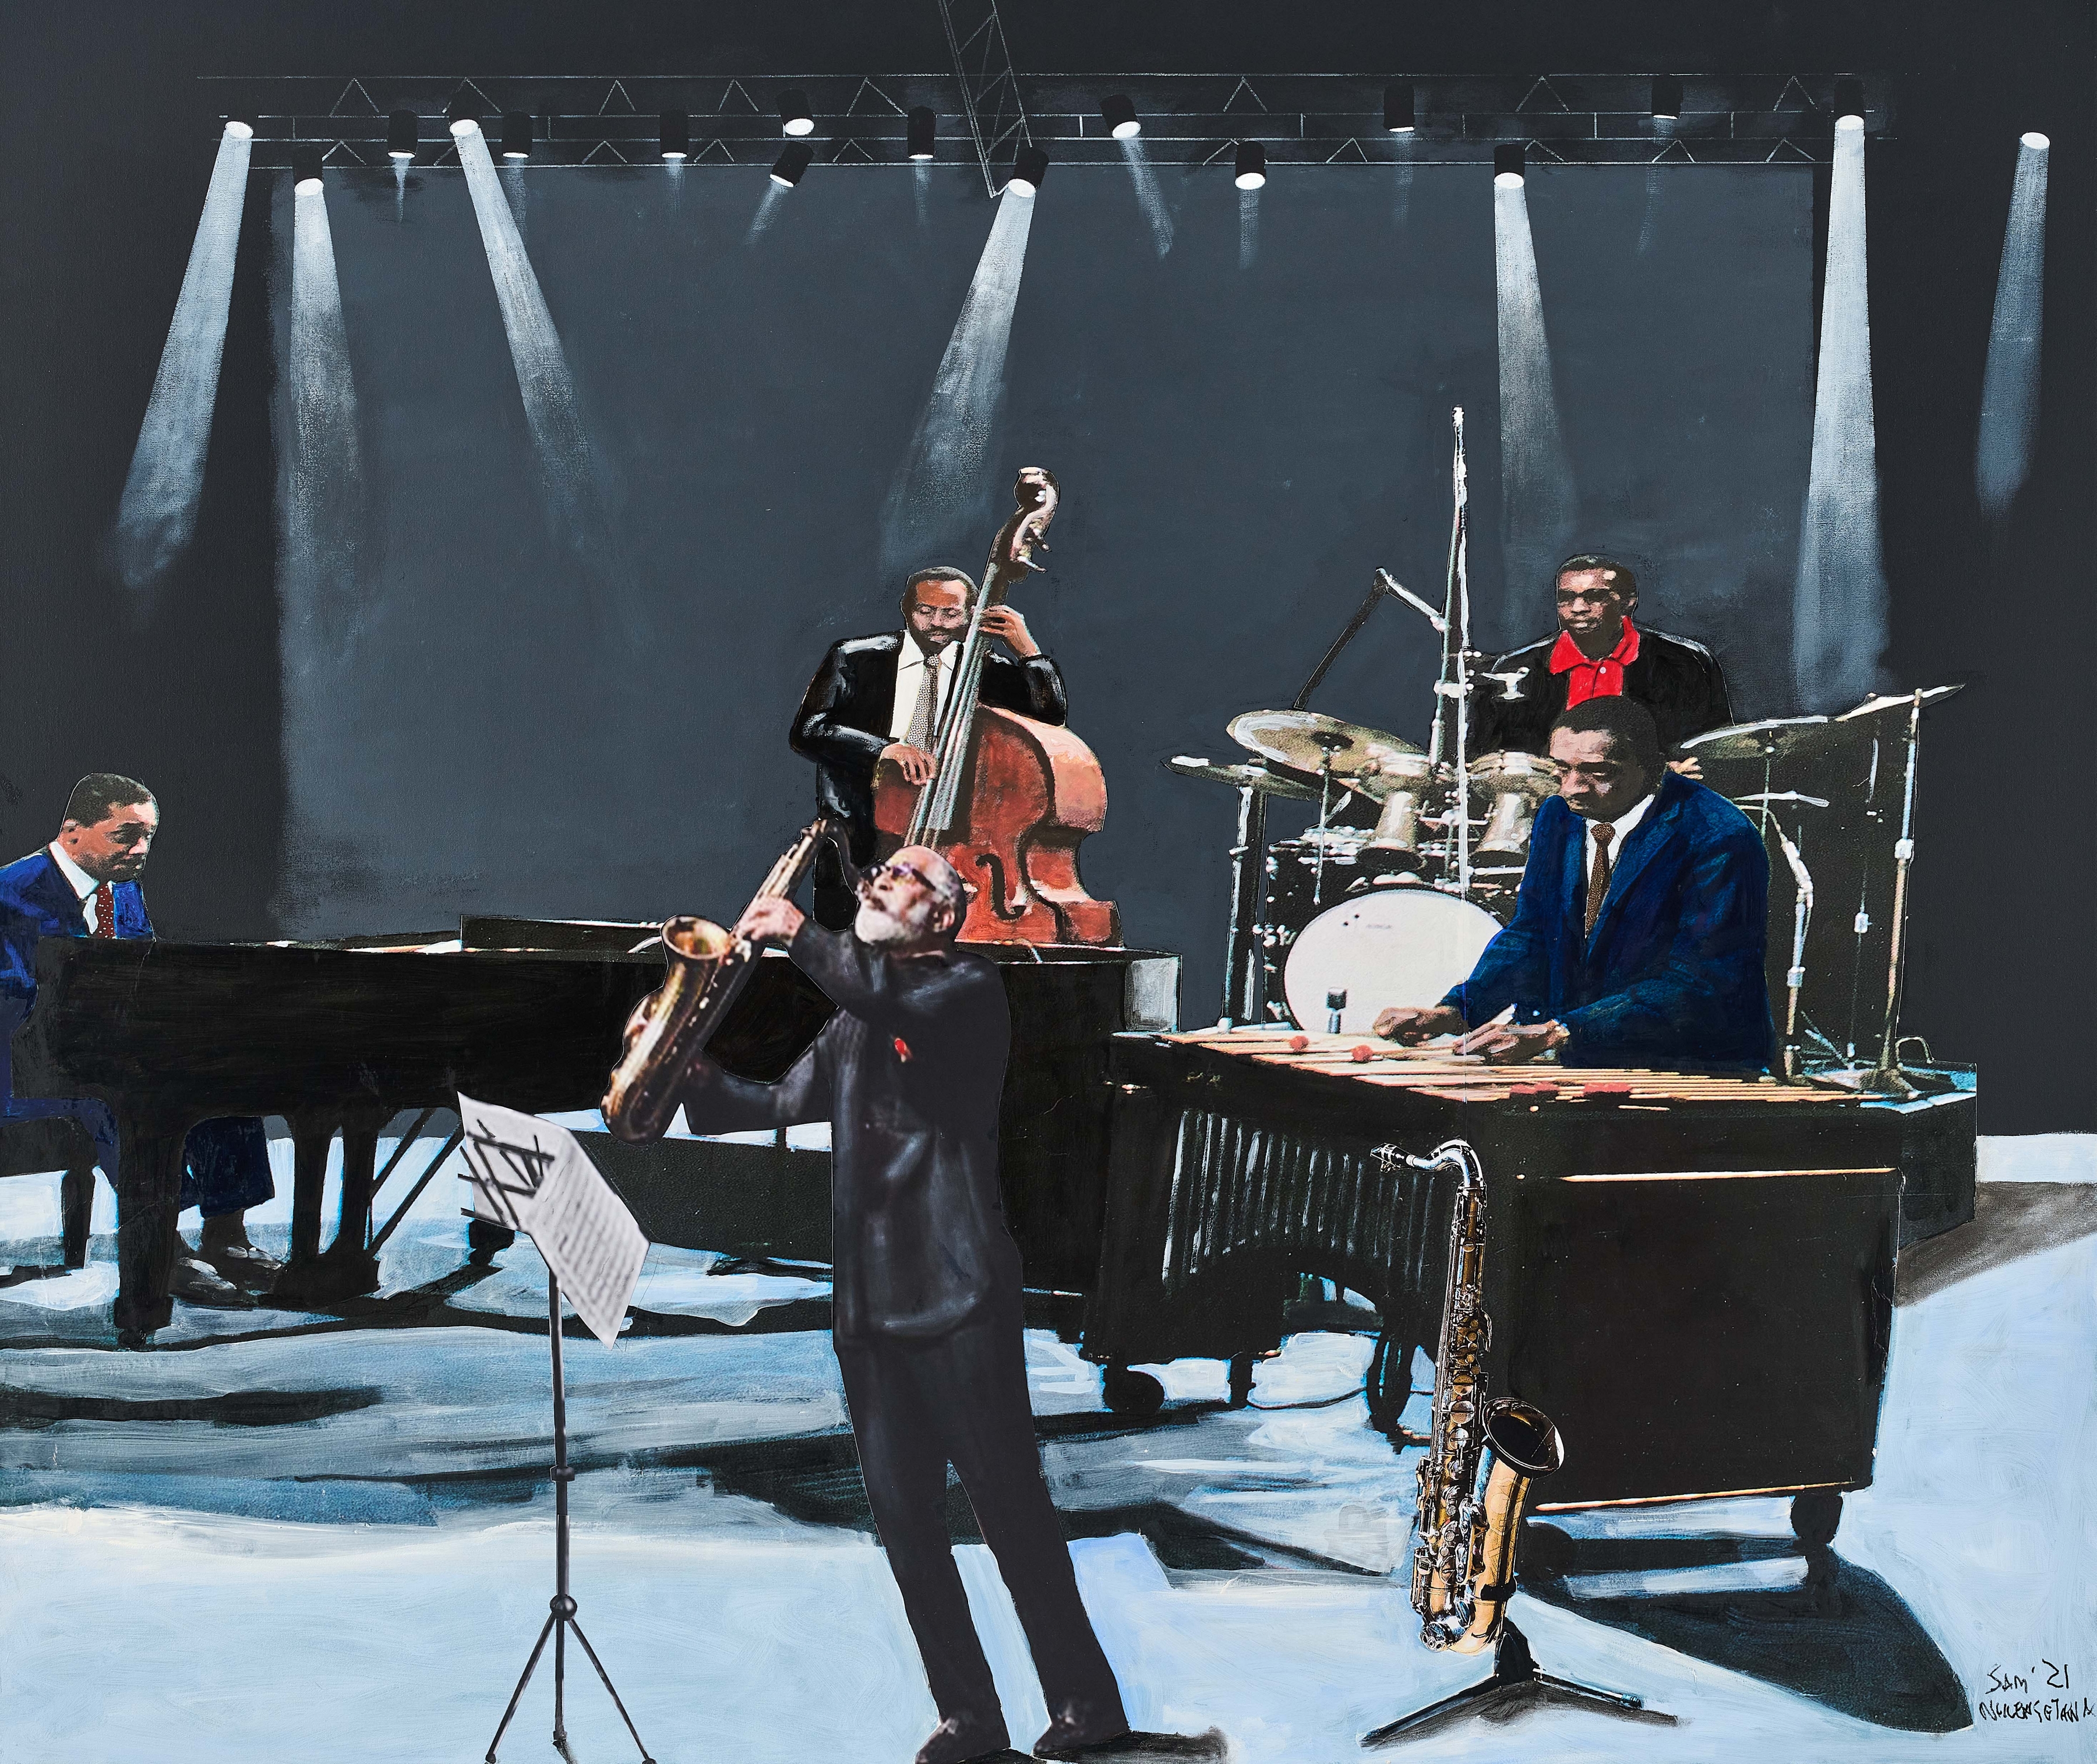 Modern jazz quartet with guest Sonny Rollins, 2021&amp;nbsp;

Mixed media on canvas

109.8 x 130 x 9.8 cm / 43.2 x 51.2 x 3.9 in.

Enquire